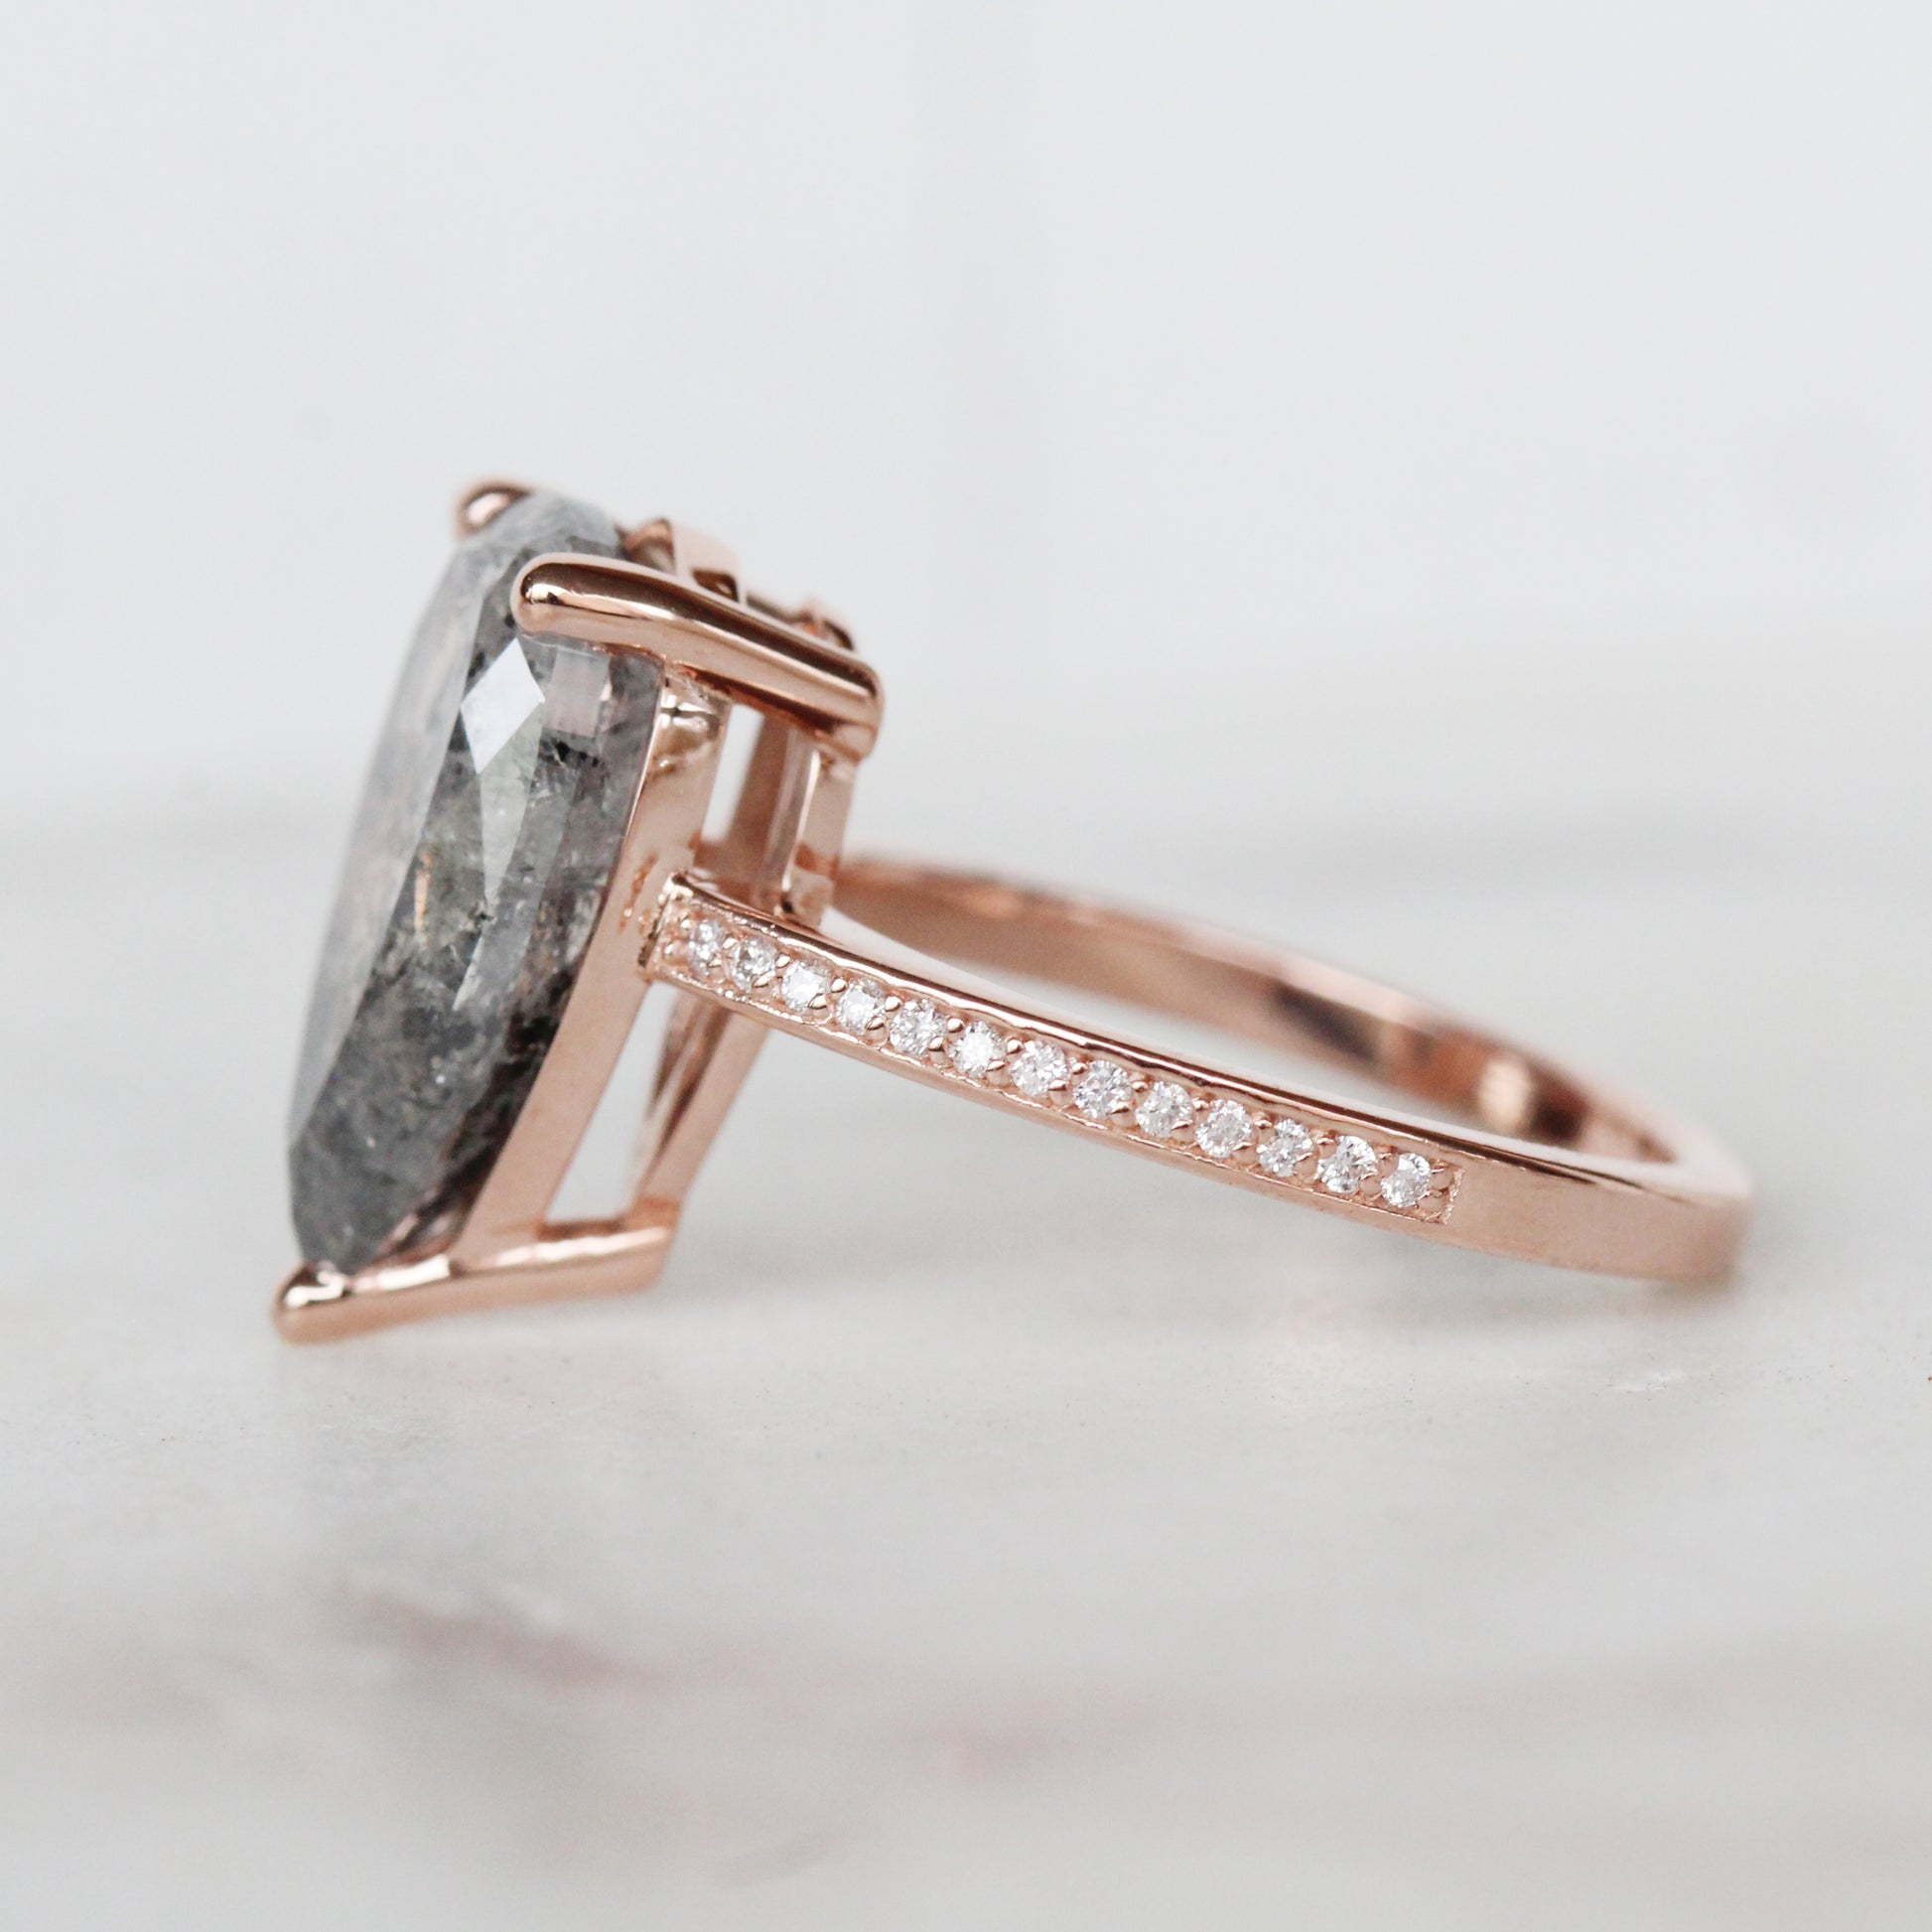 Imani Ring with a 4.07 Carat Celestial Pear Diamond and Accent Diamonds in 14K Rose Gold - Ready to size and ship - Midwinter Co. Alternative Bridal Rings and Modern Fine Jewelry